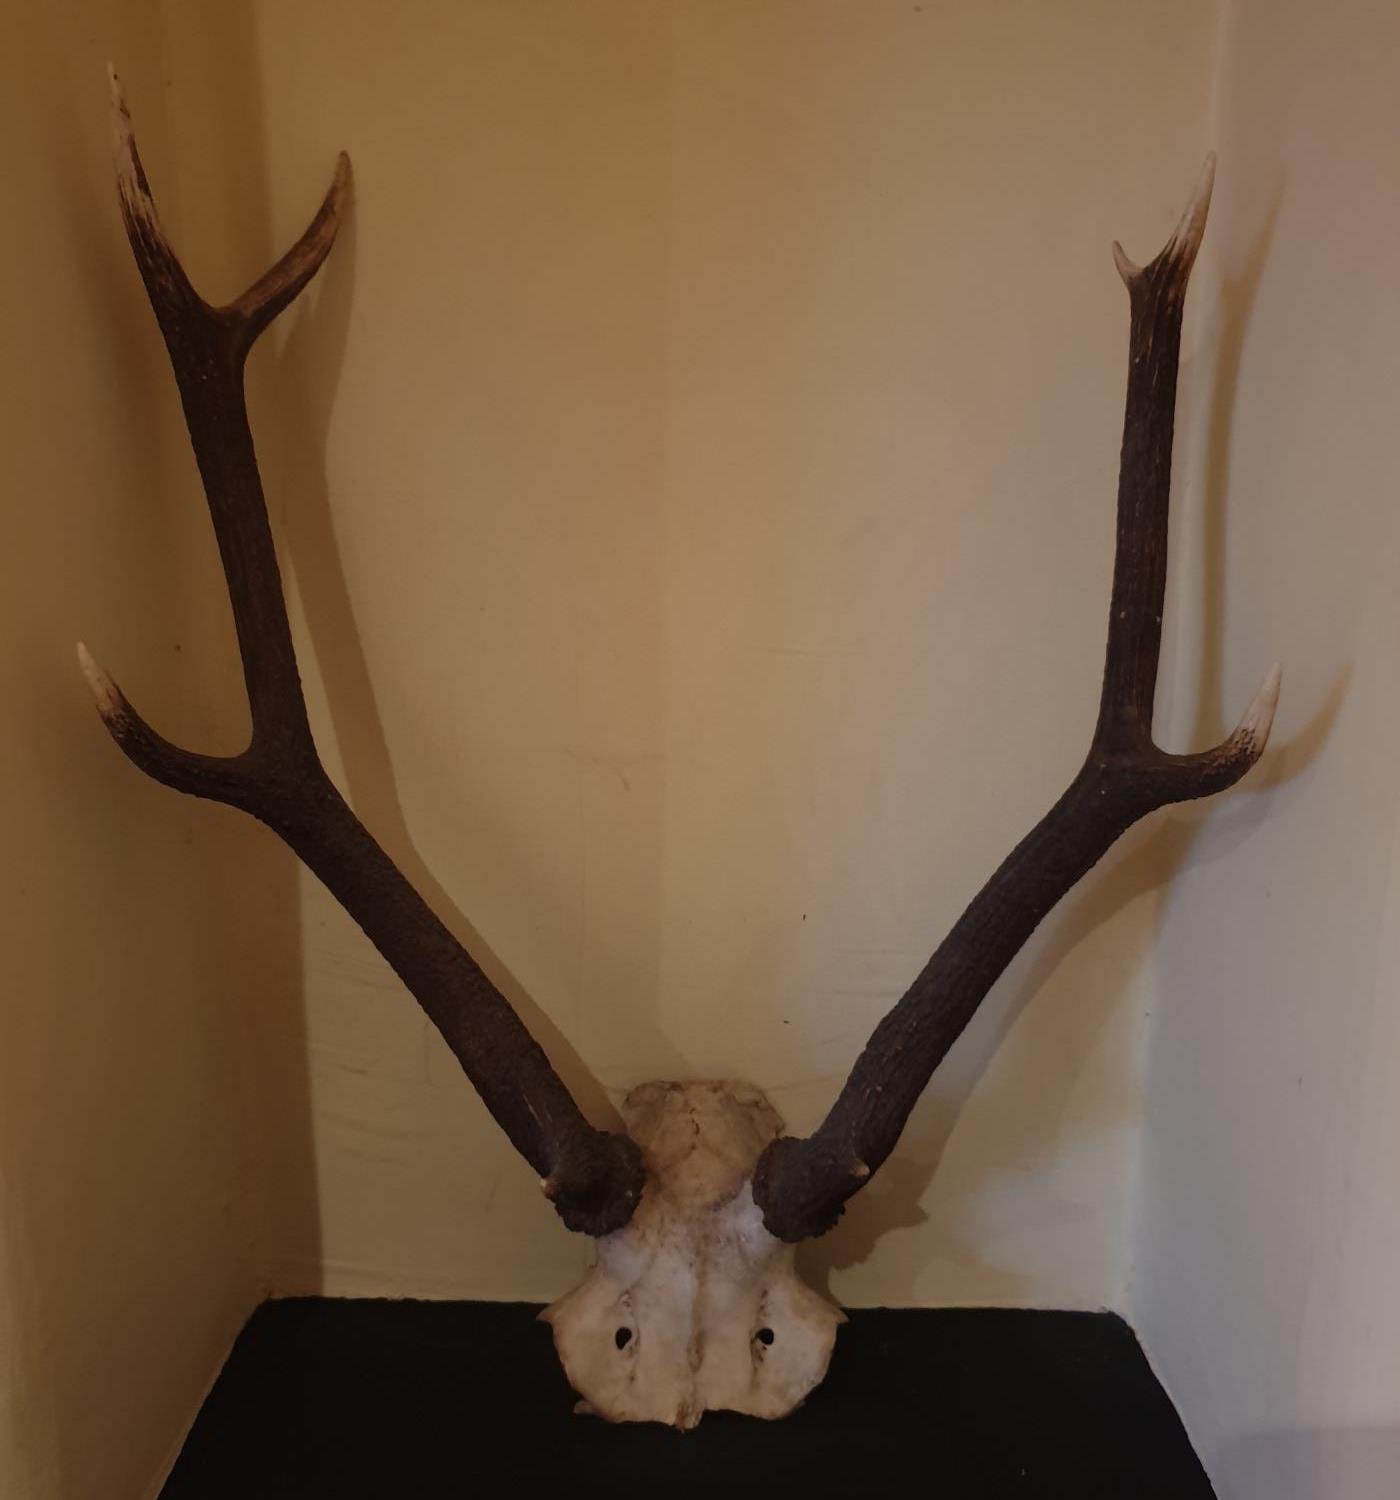 A set of Antlers.